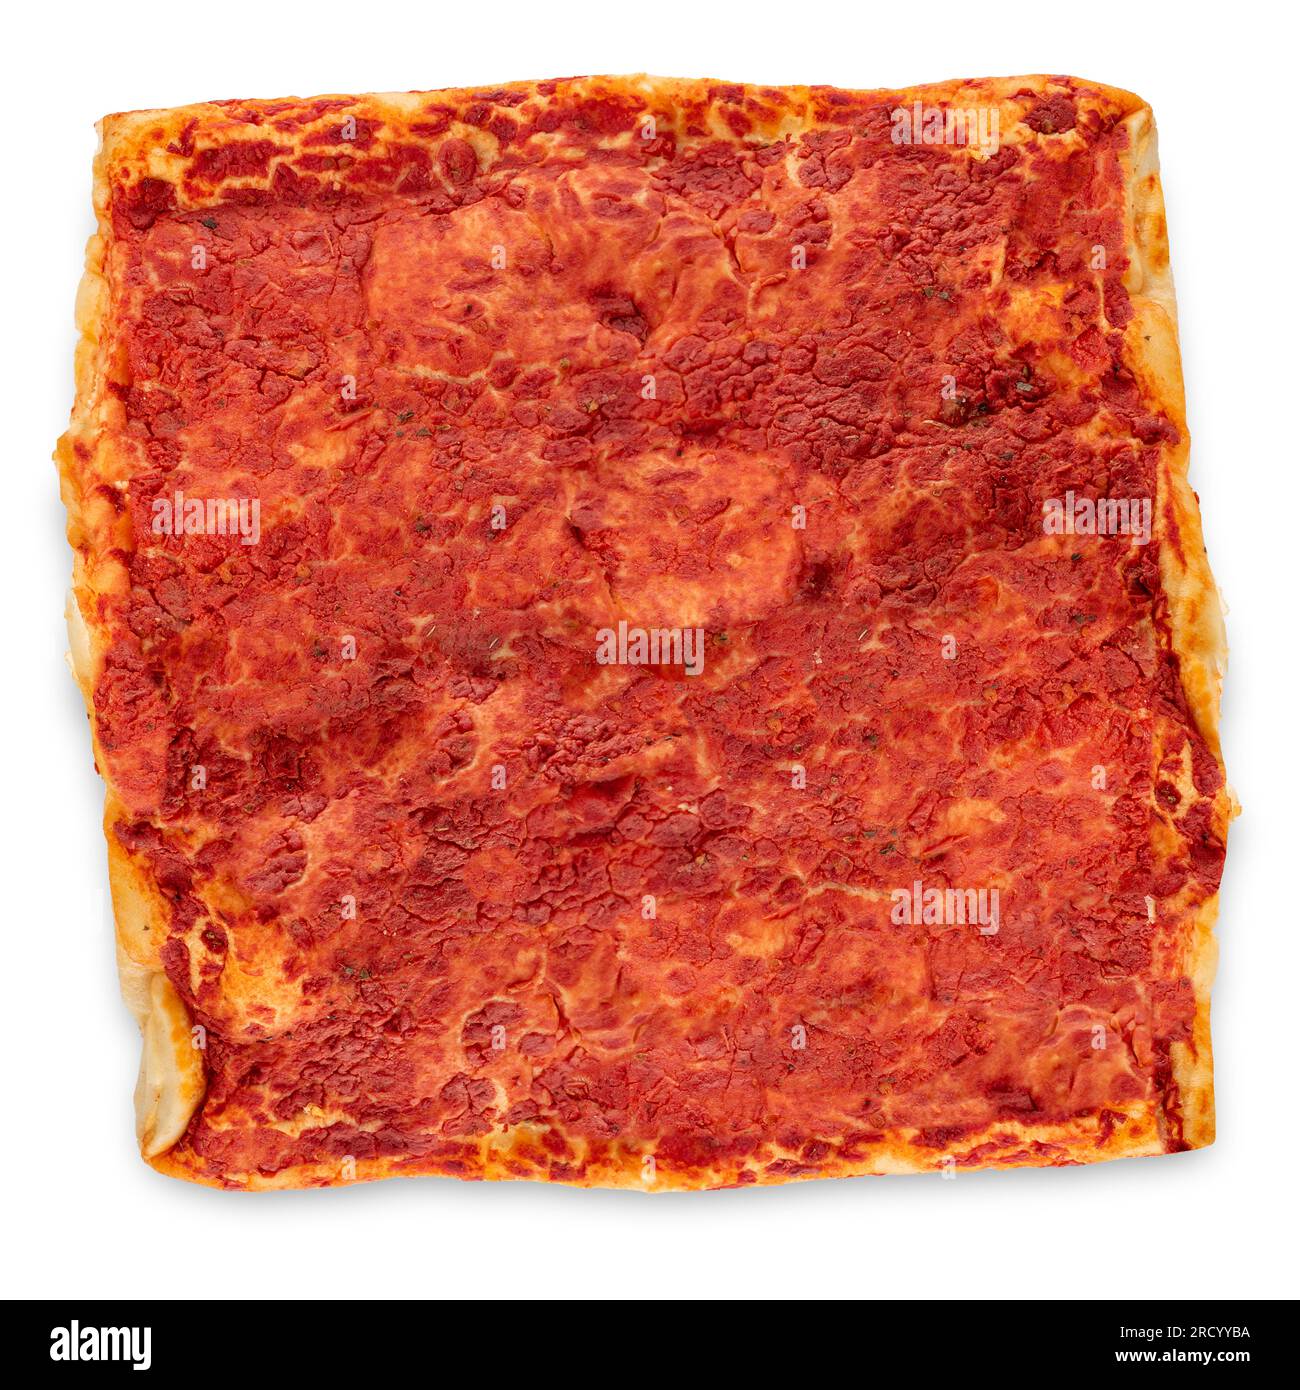 Square pizza with tomato sauce  top view isolated on white with clipping path included Stock Photo